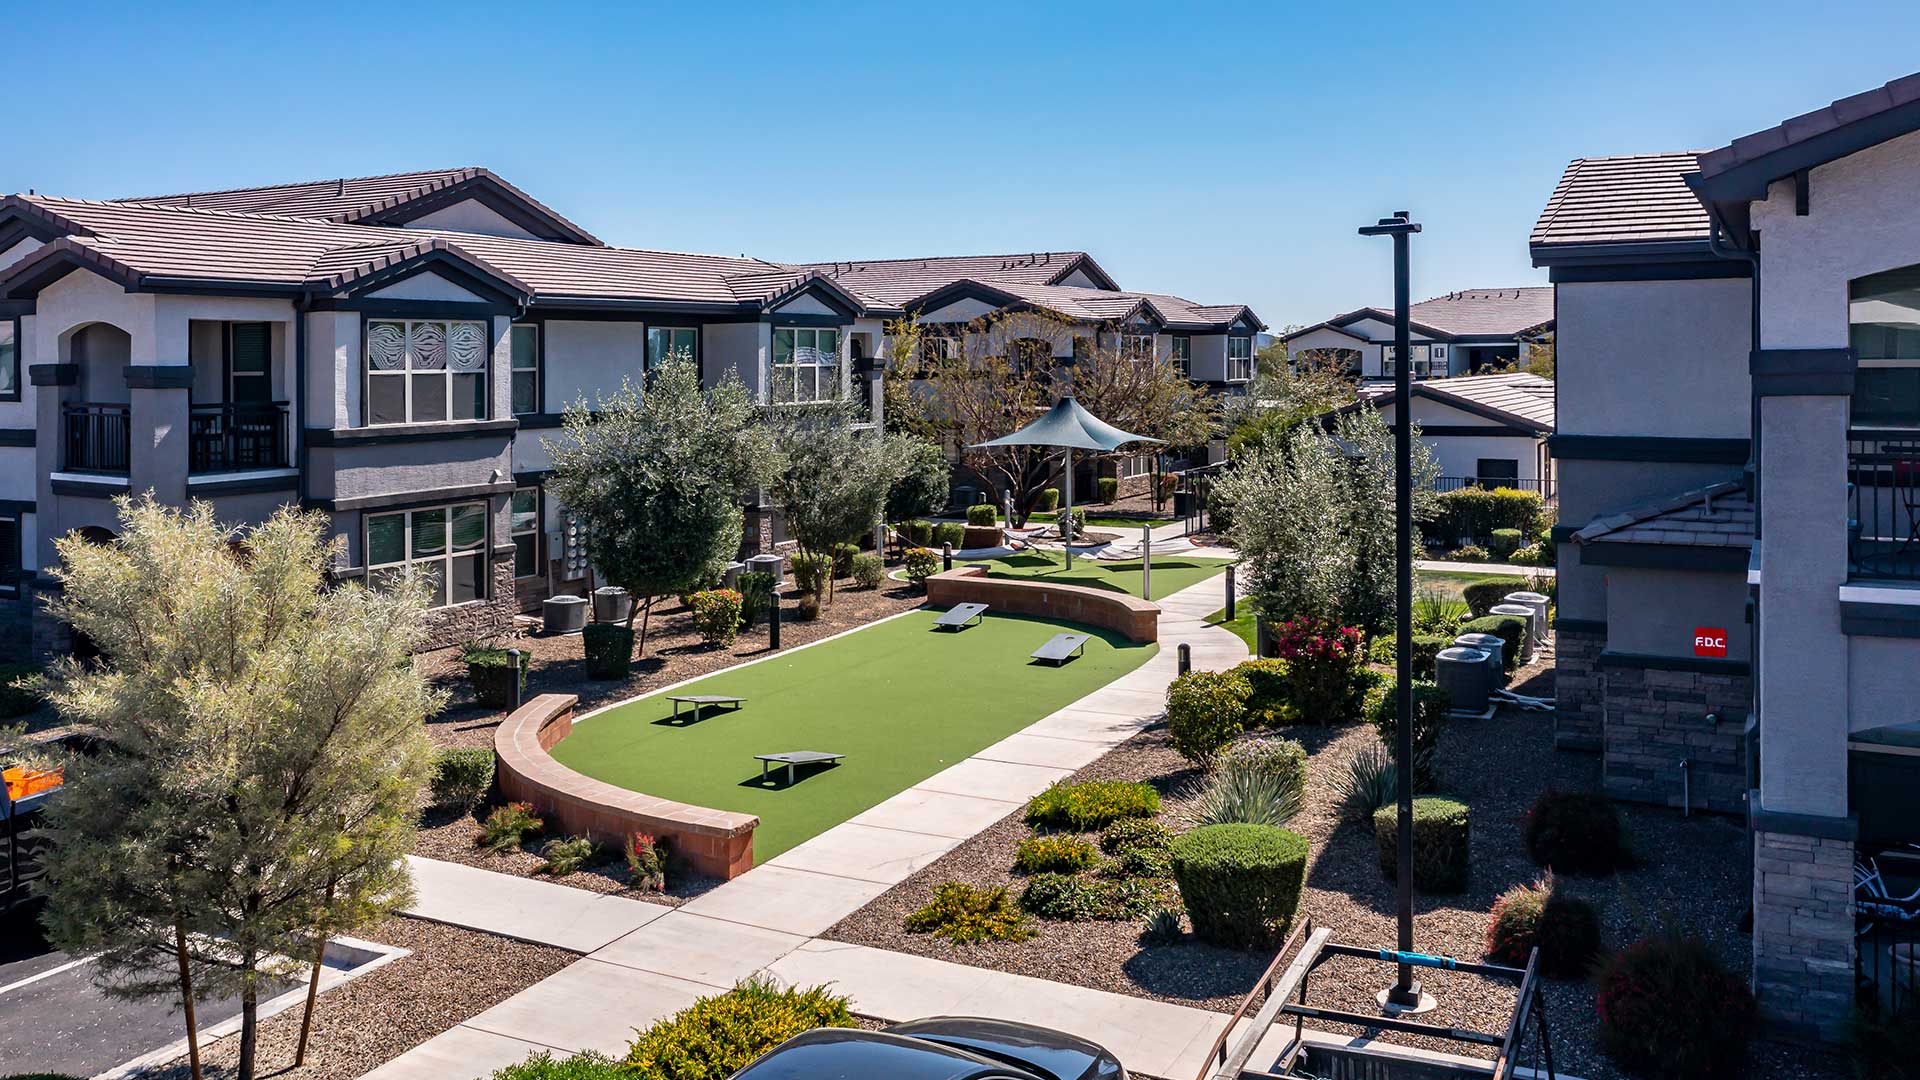 Aerial view of a contemporary apartment complex with green lawns, walking paths, and shaded seating areas under a clear blue sky.